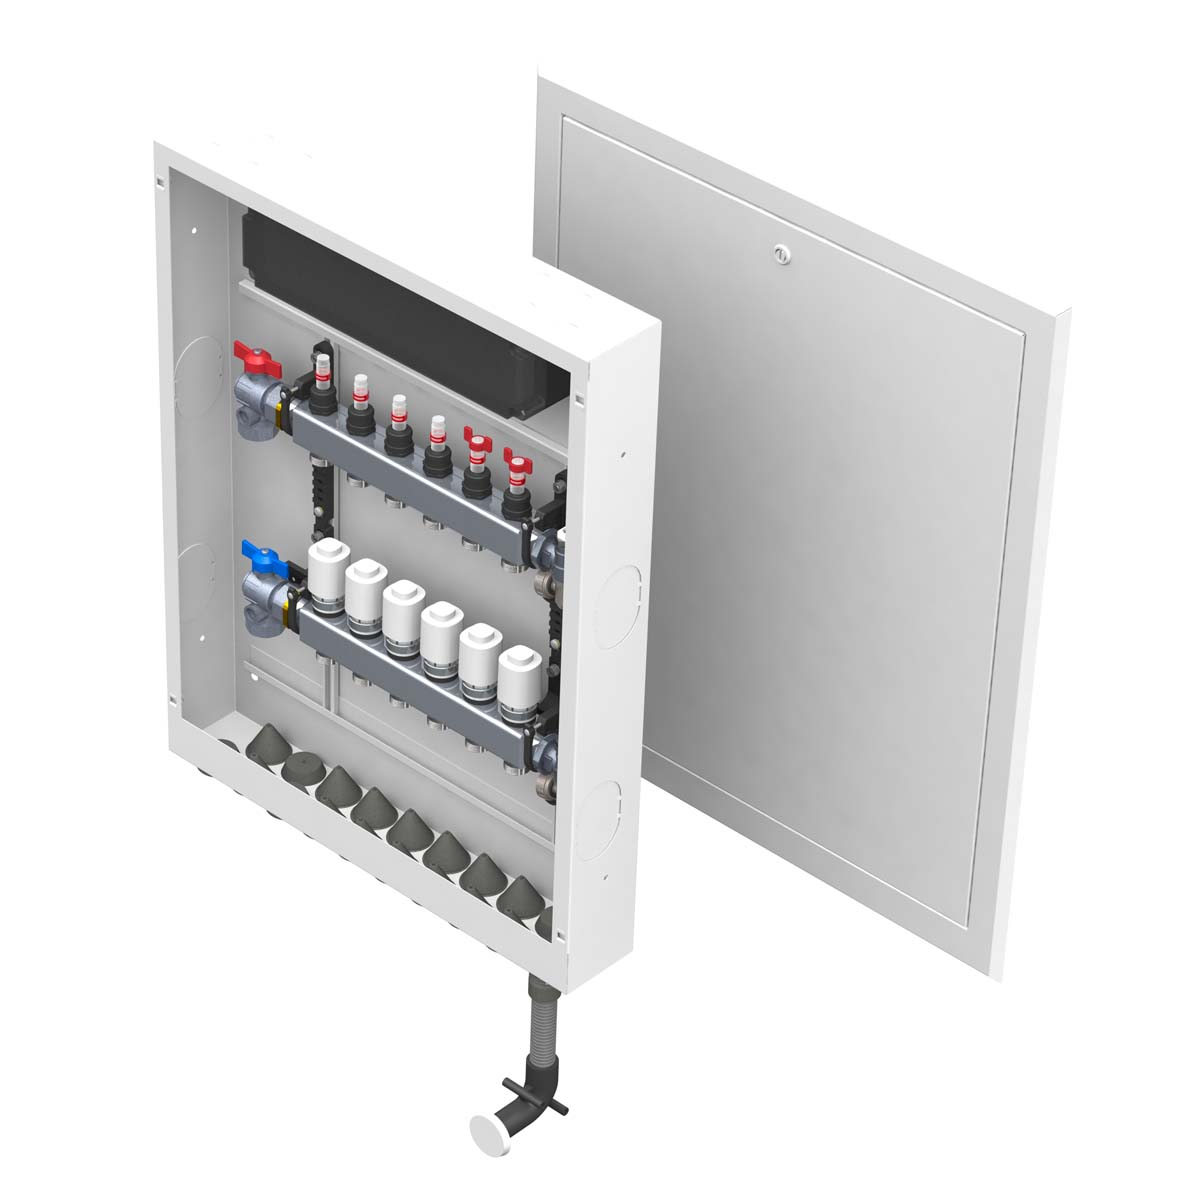 Featured image for “Preassembled manifold cabinet for in wall mounting”